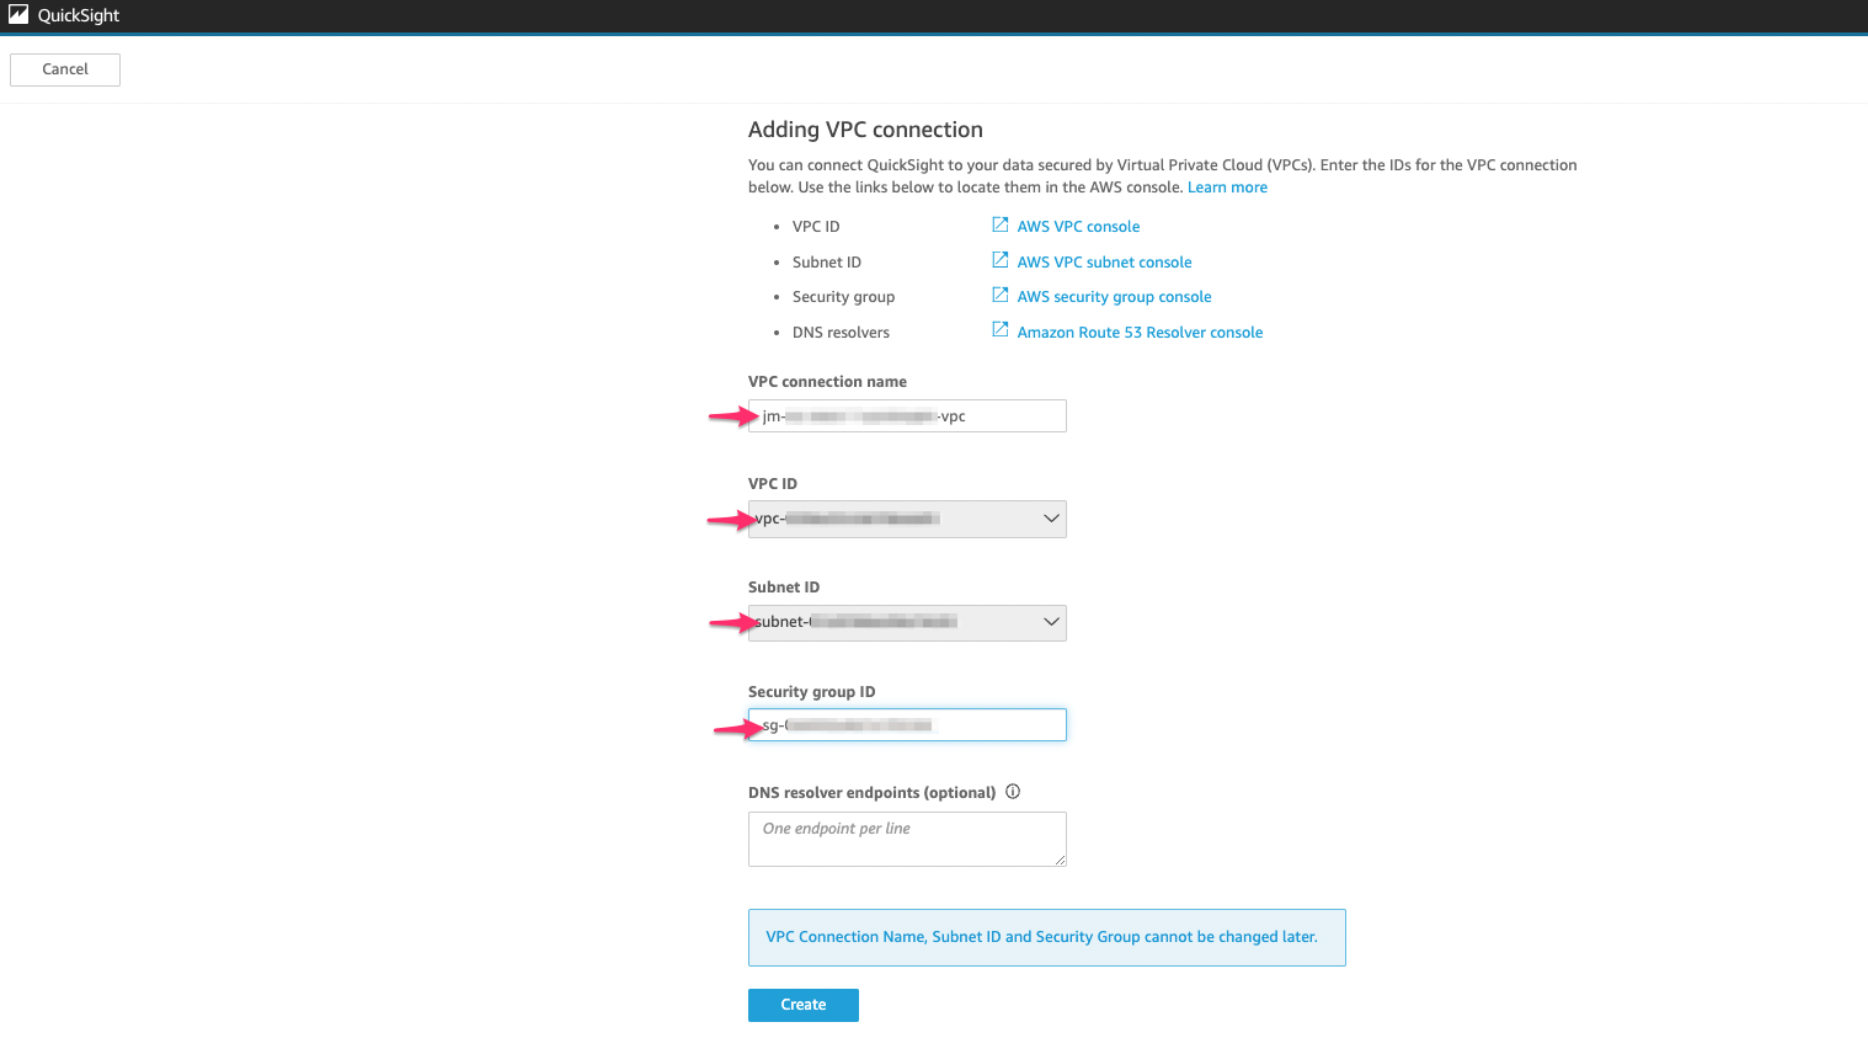 Adding a VPC connection in QuickSight